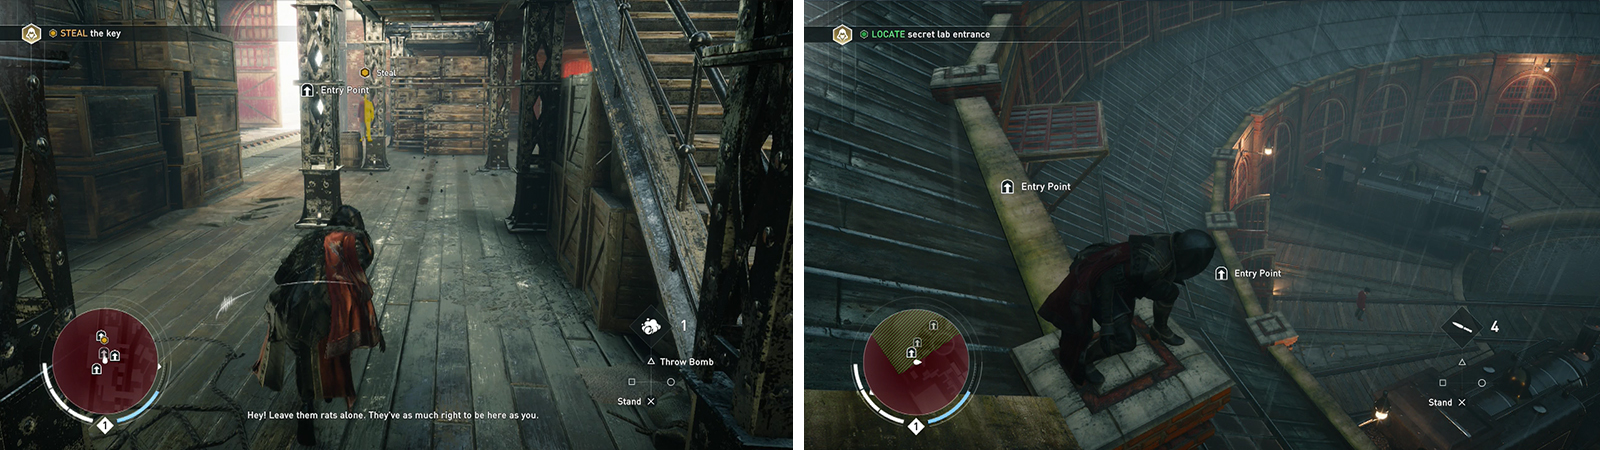 After pickpocketing the key (left) make your way over to the building with the secret lab (right).